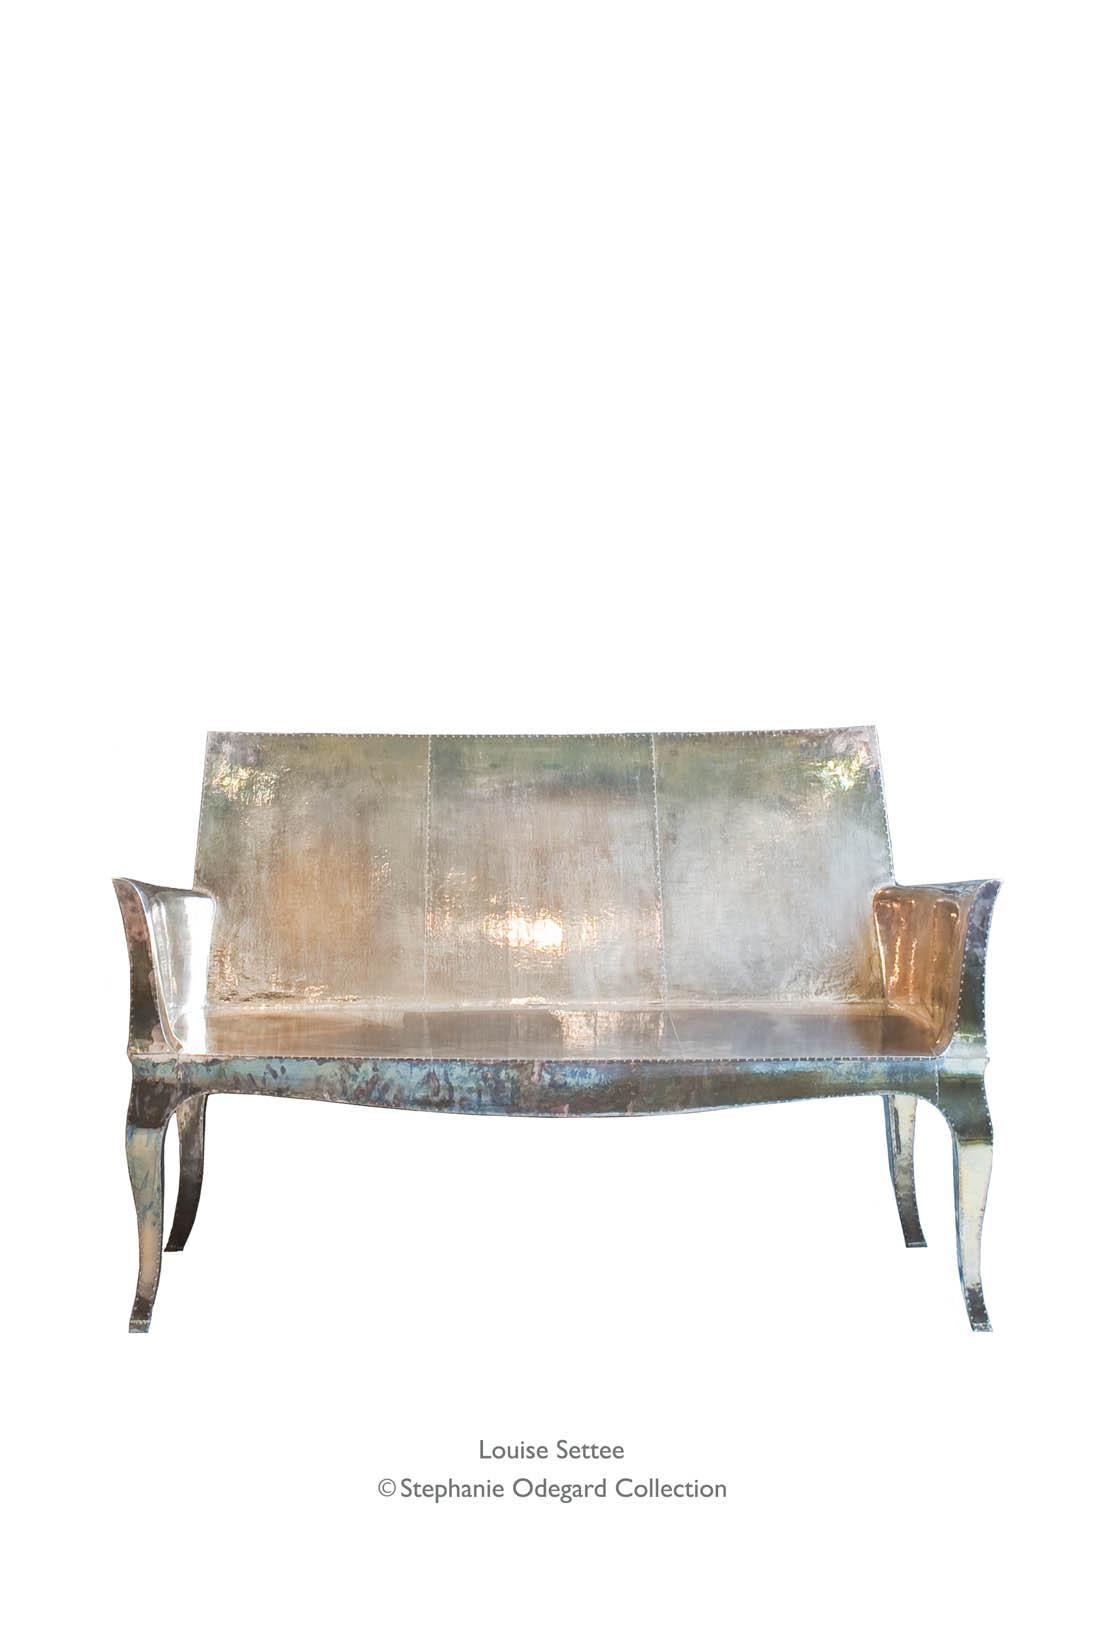 Louise Settee Art Deco Settees in Fine Hammered Antique Bronze by Paul Mathieu For Sale 6